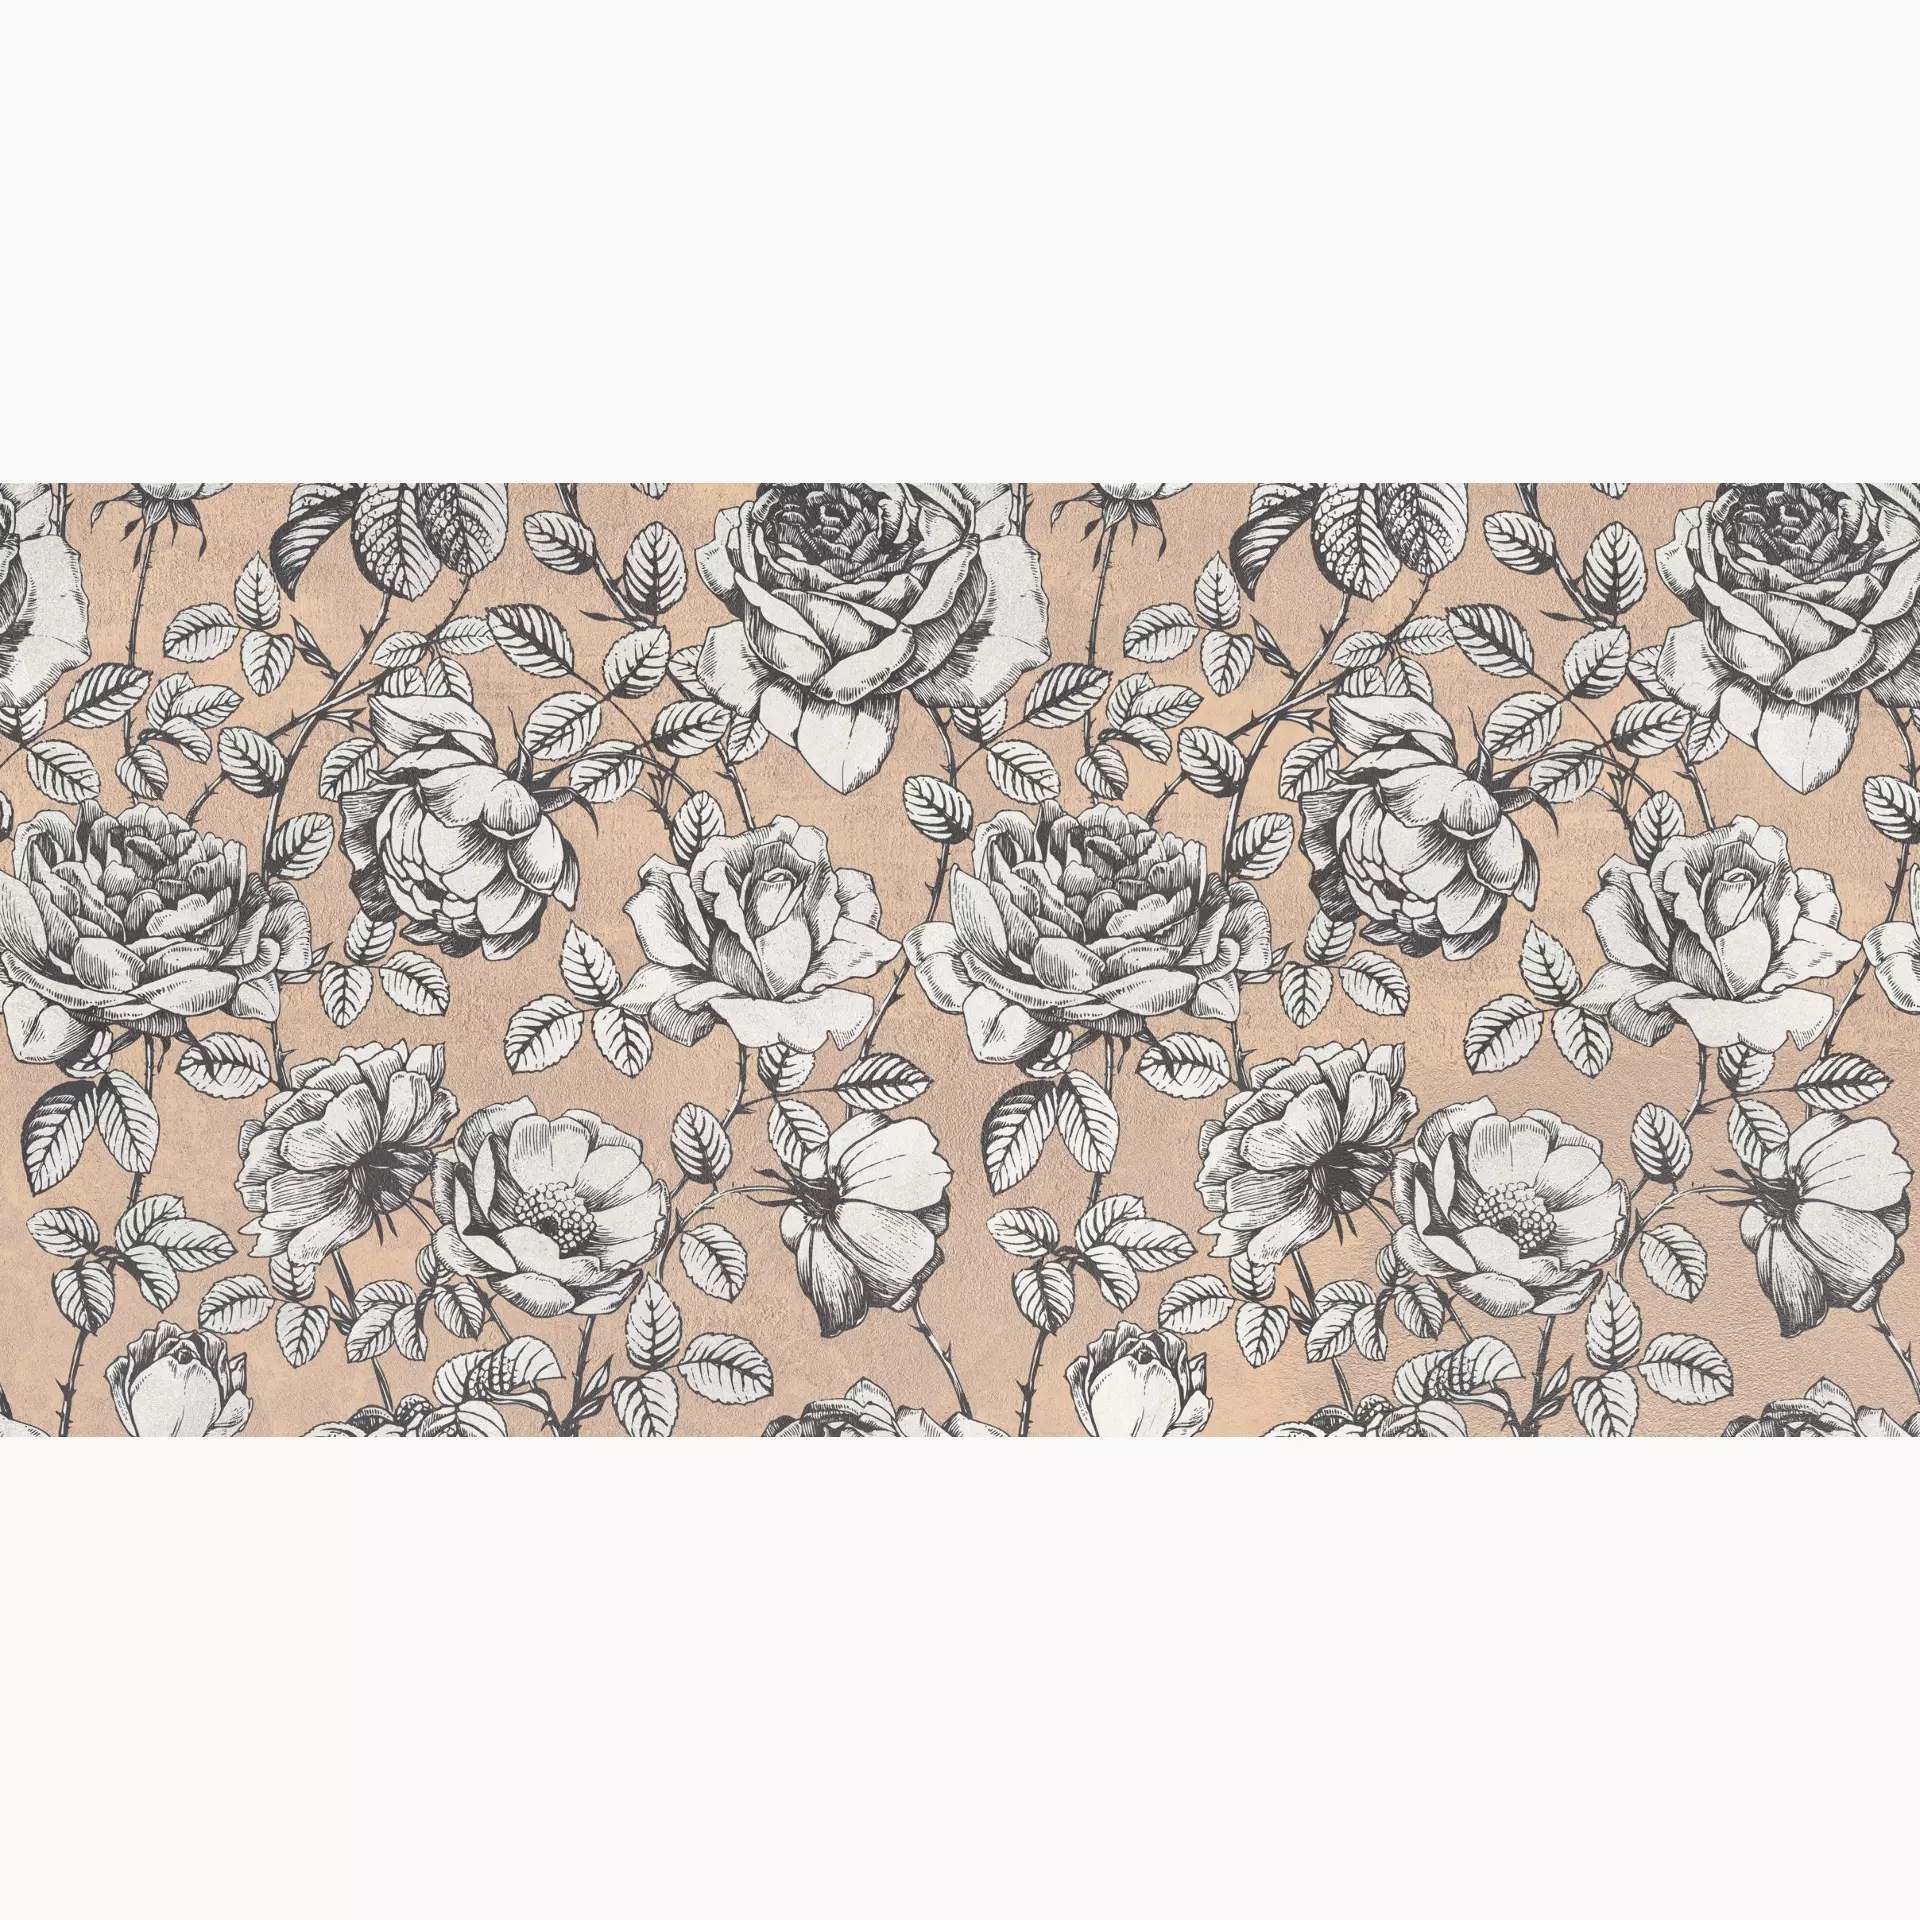 ABK Wide & Style Mini Roses Naturale Decor PF60008439 60x120cm rectified 7mm